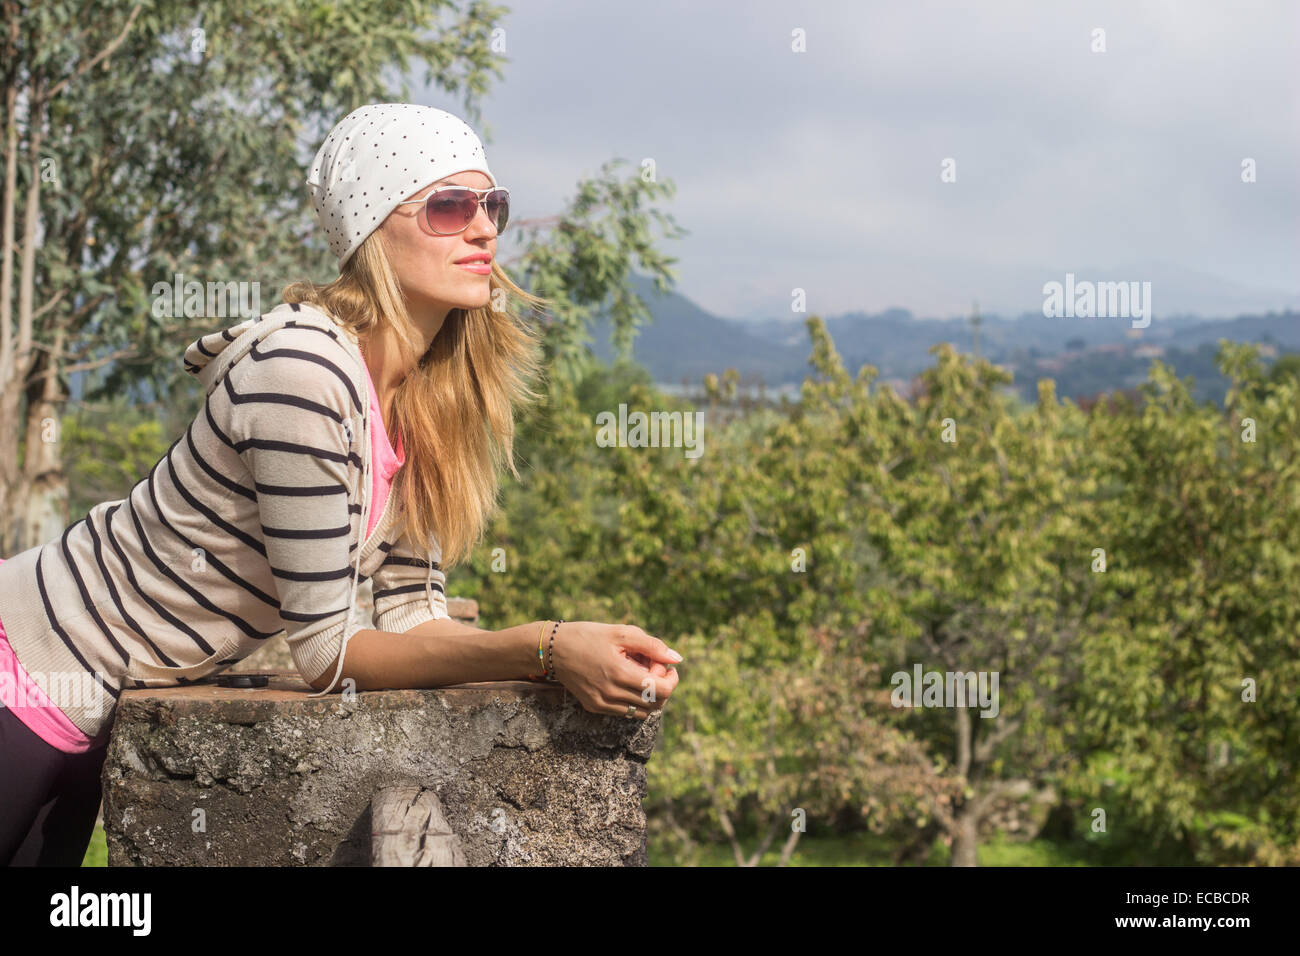 young woman relaxing spring day outdoors vacation enjoying looking 'copy space' Stock Photo